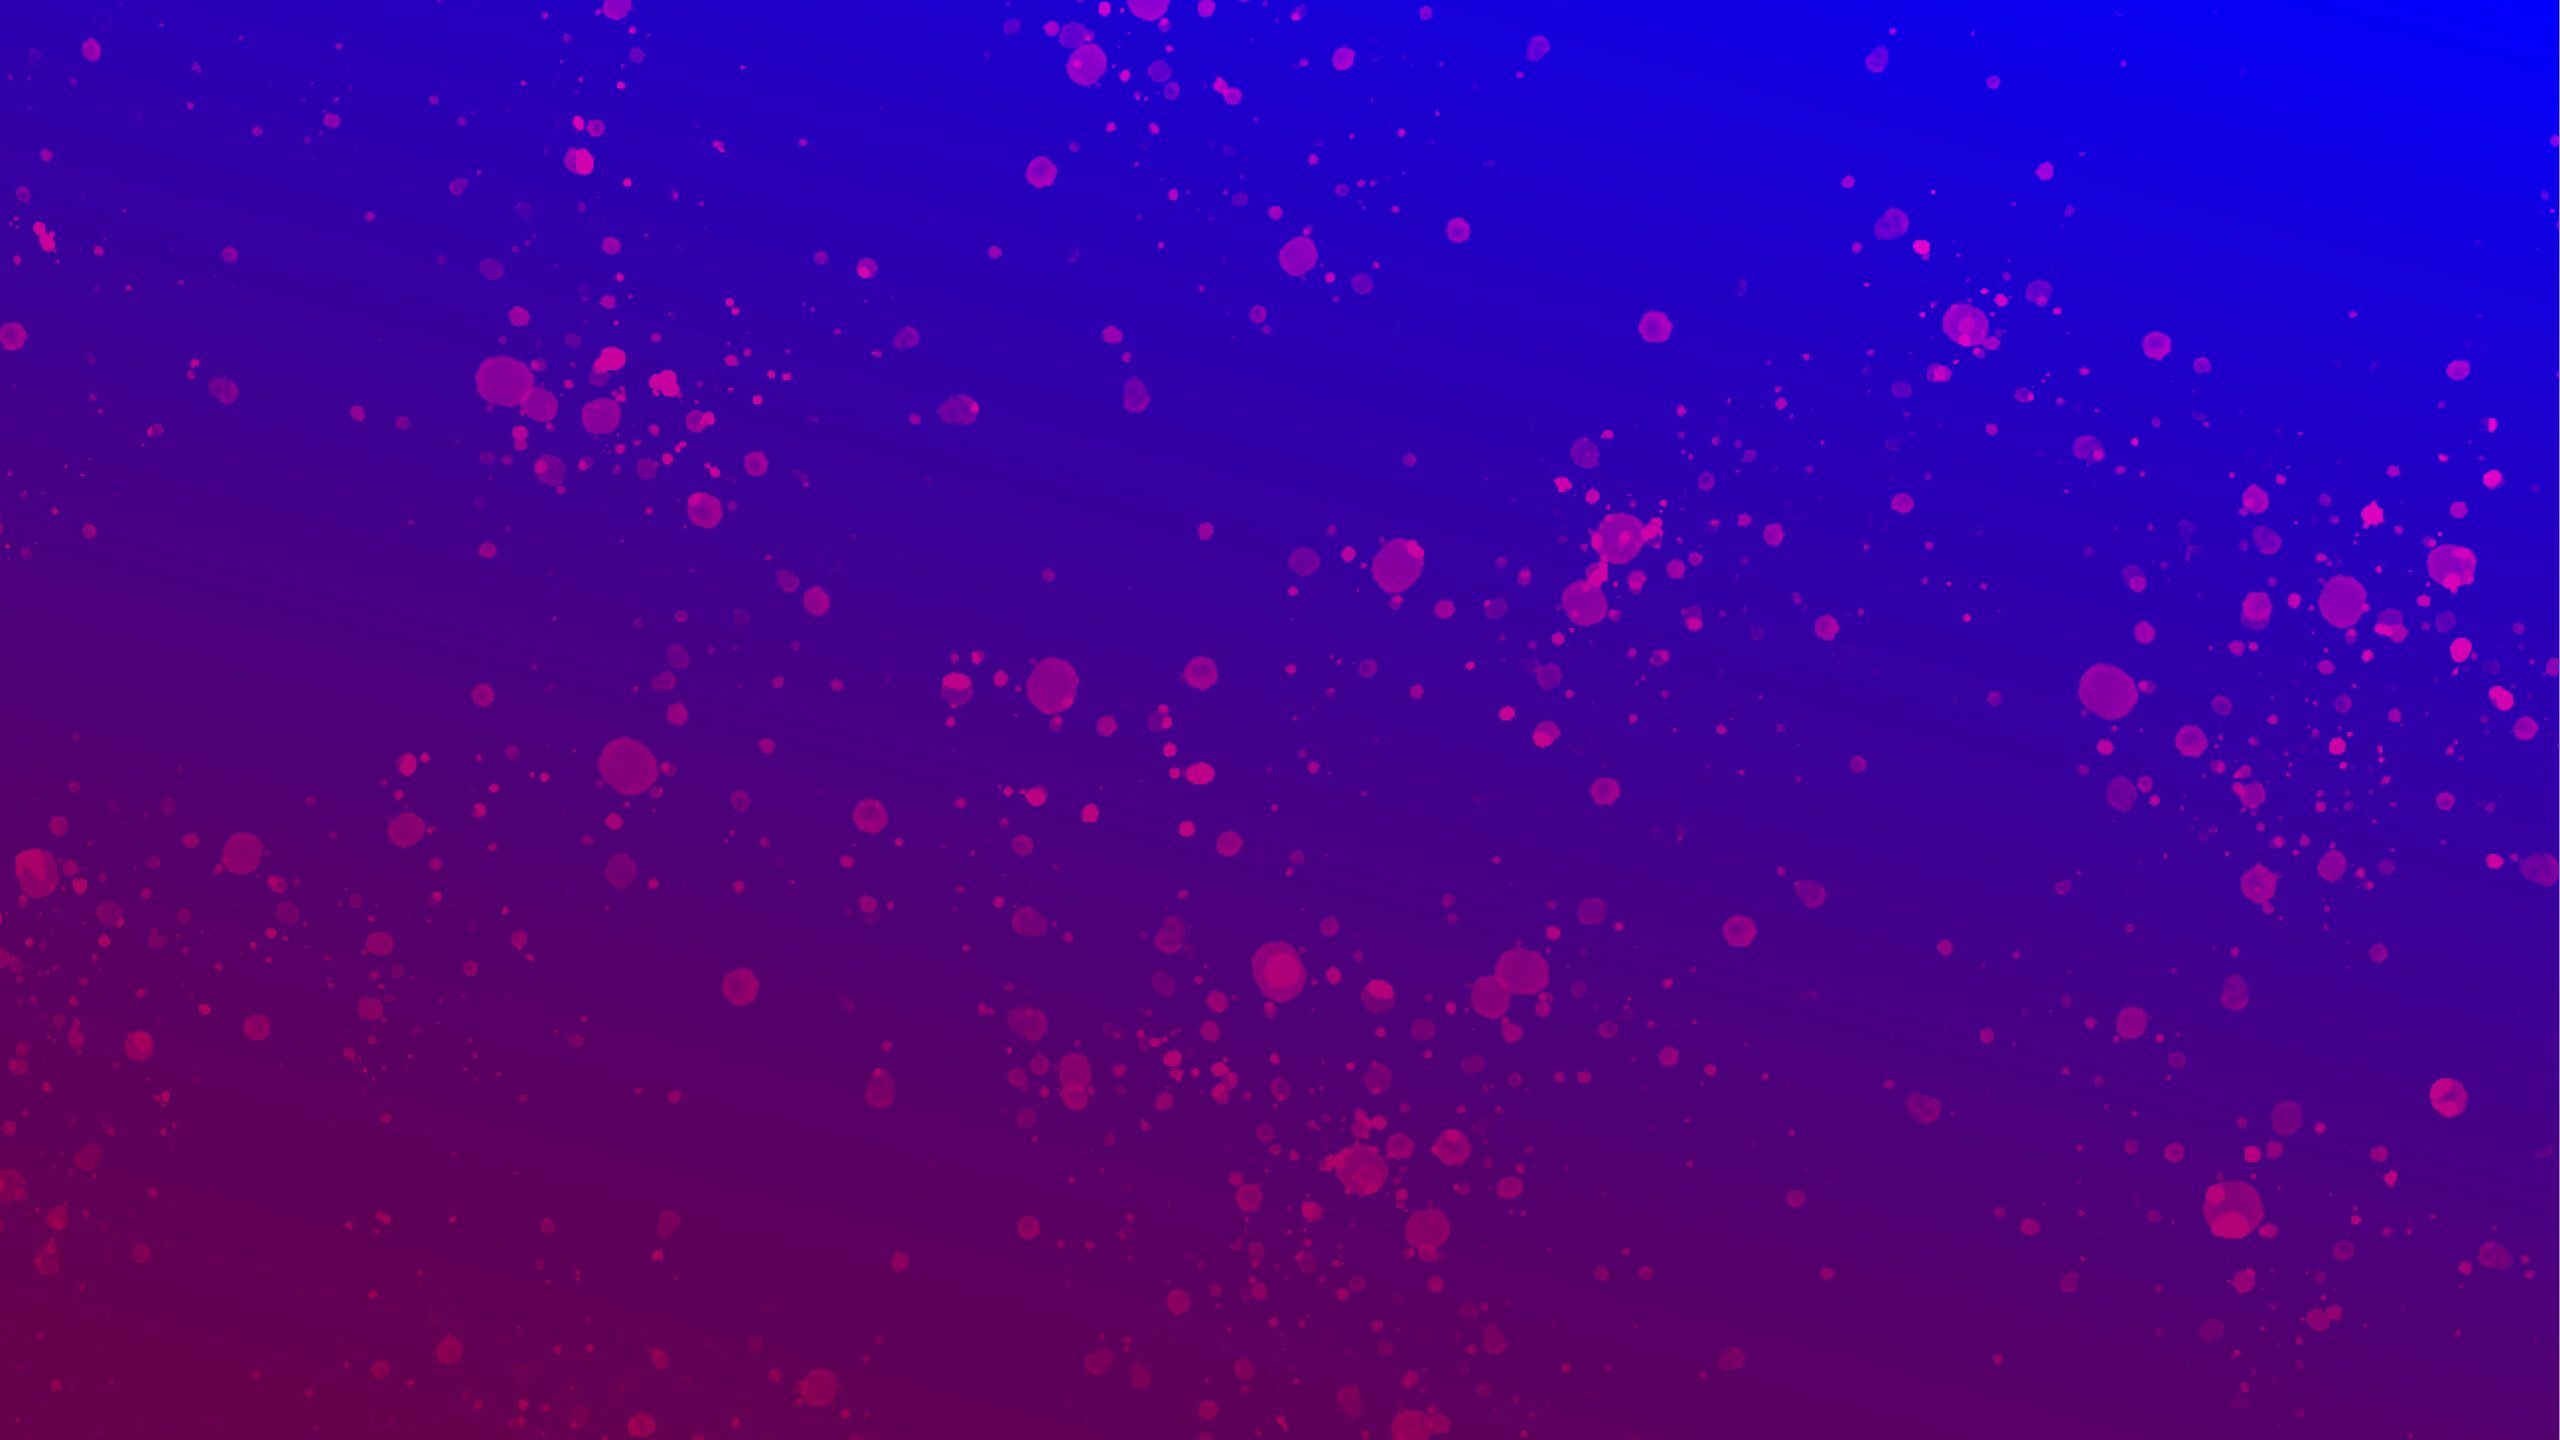 Blue and pink gradient background for youtube thumbnail - veeForu